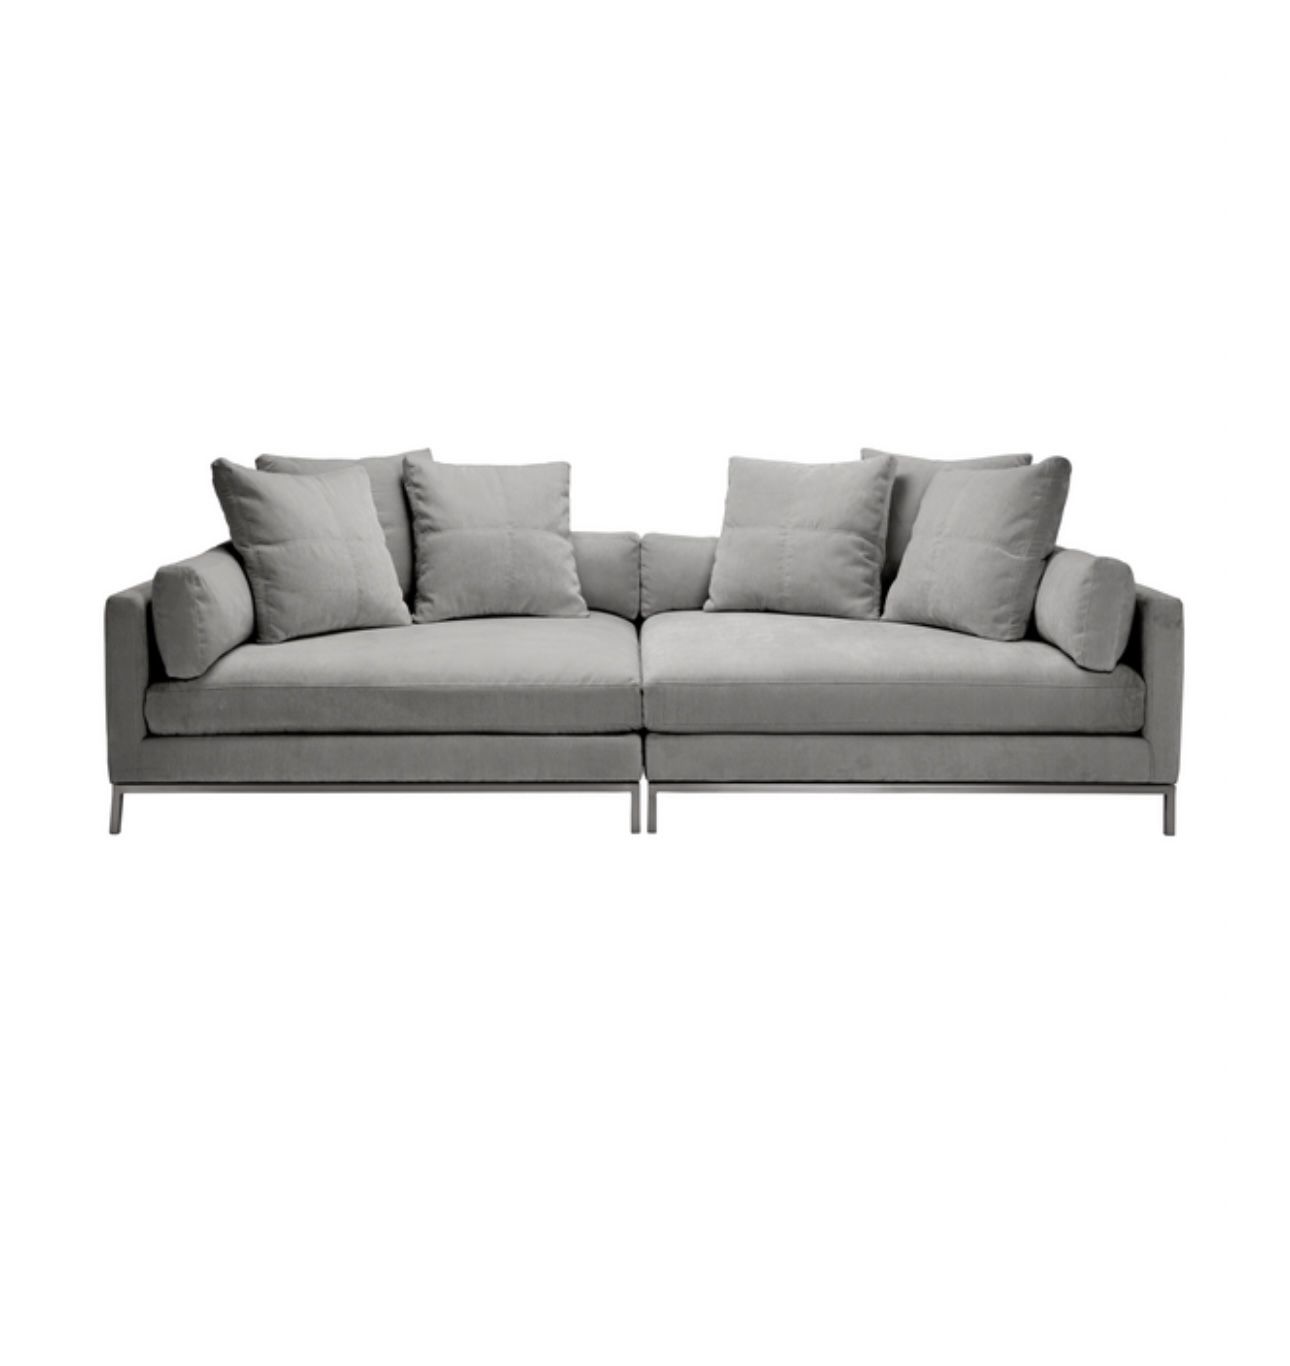 Z Gallerie Extra Deep Sofa - 2 Piece Couch